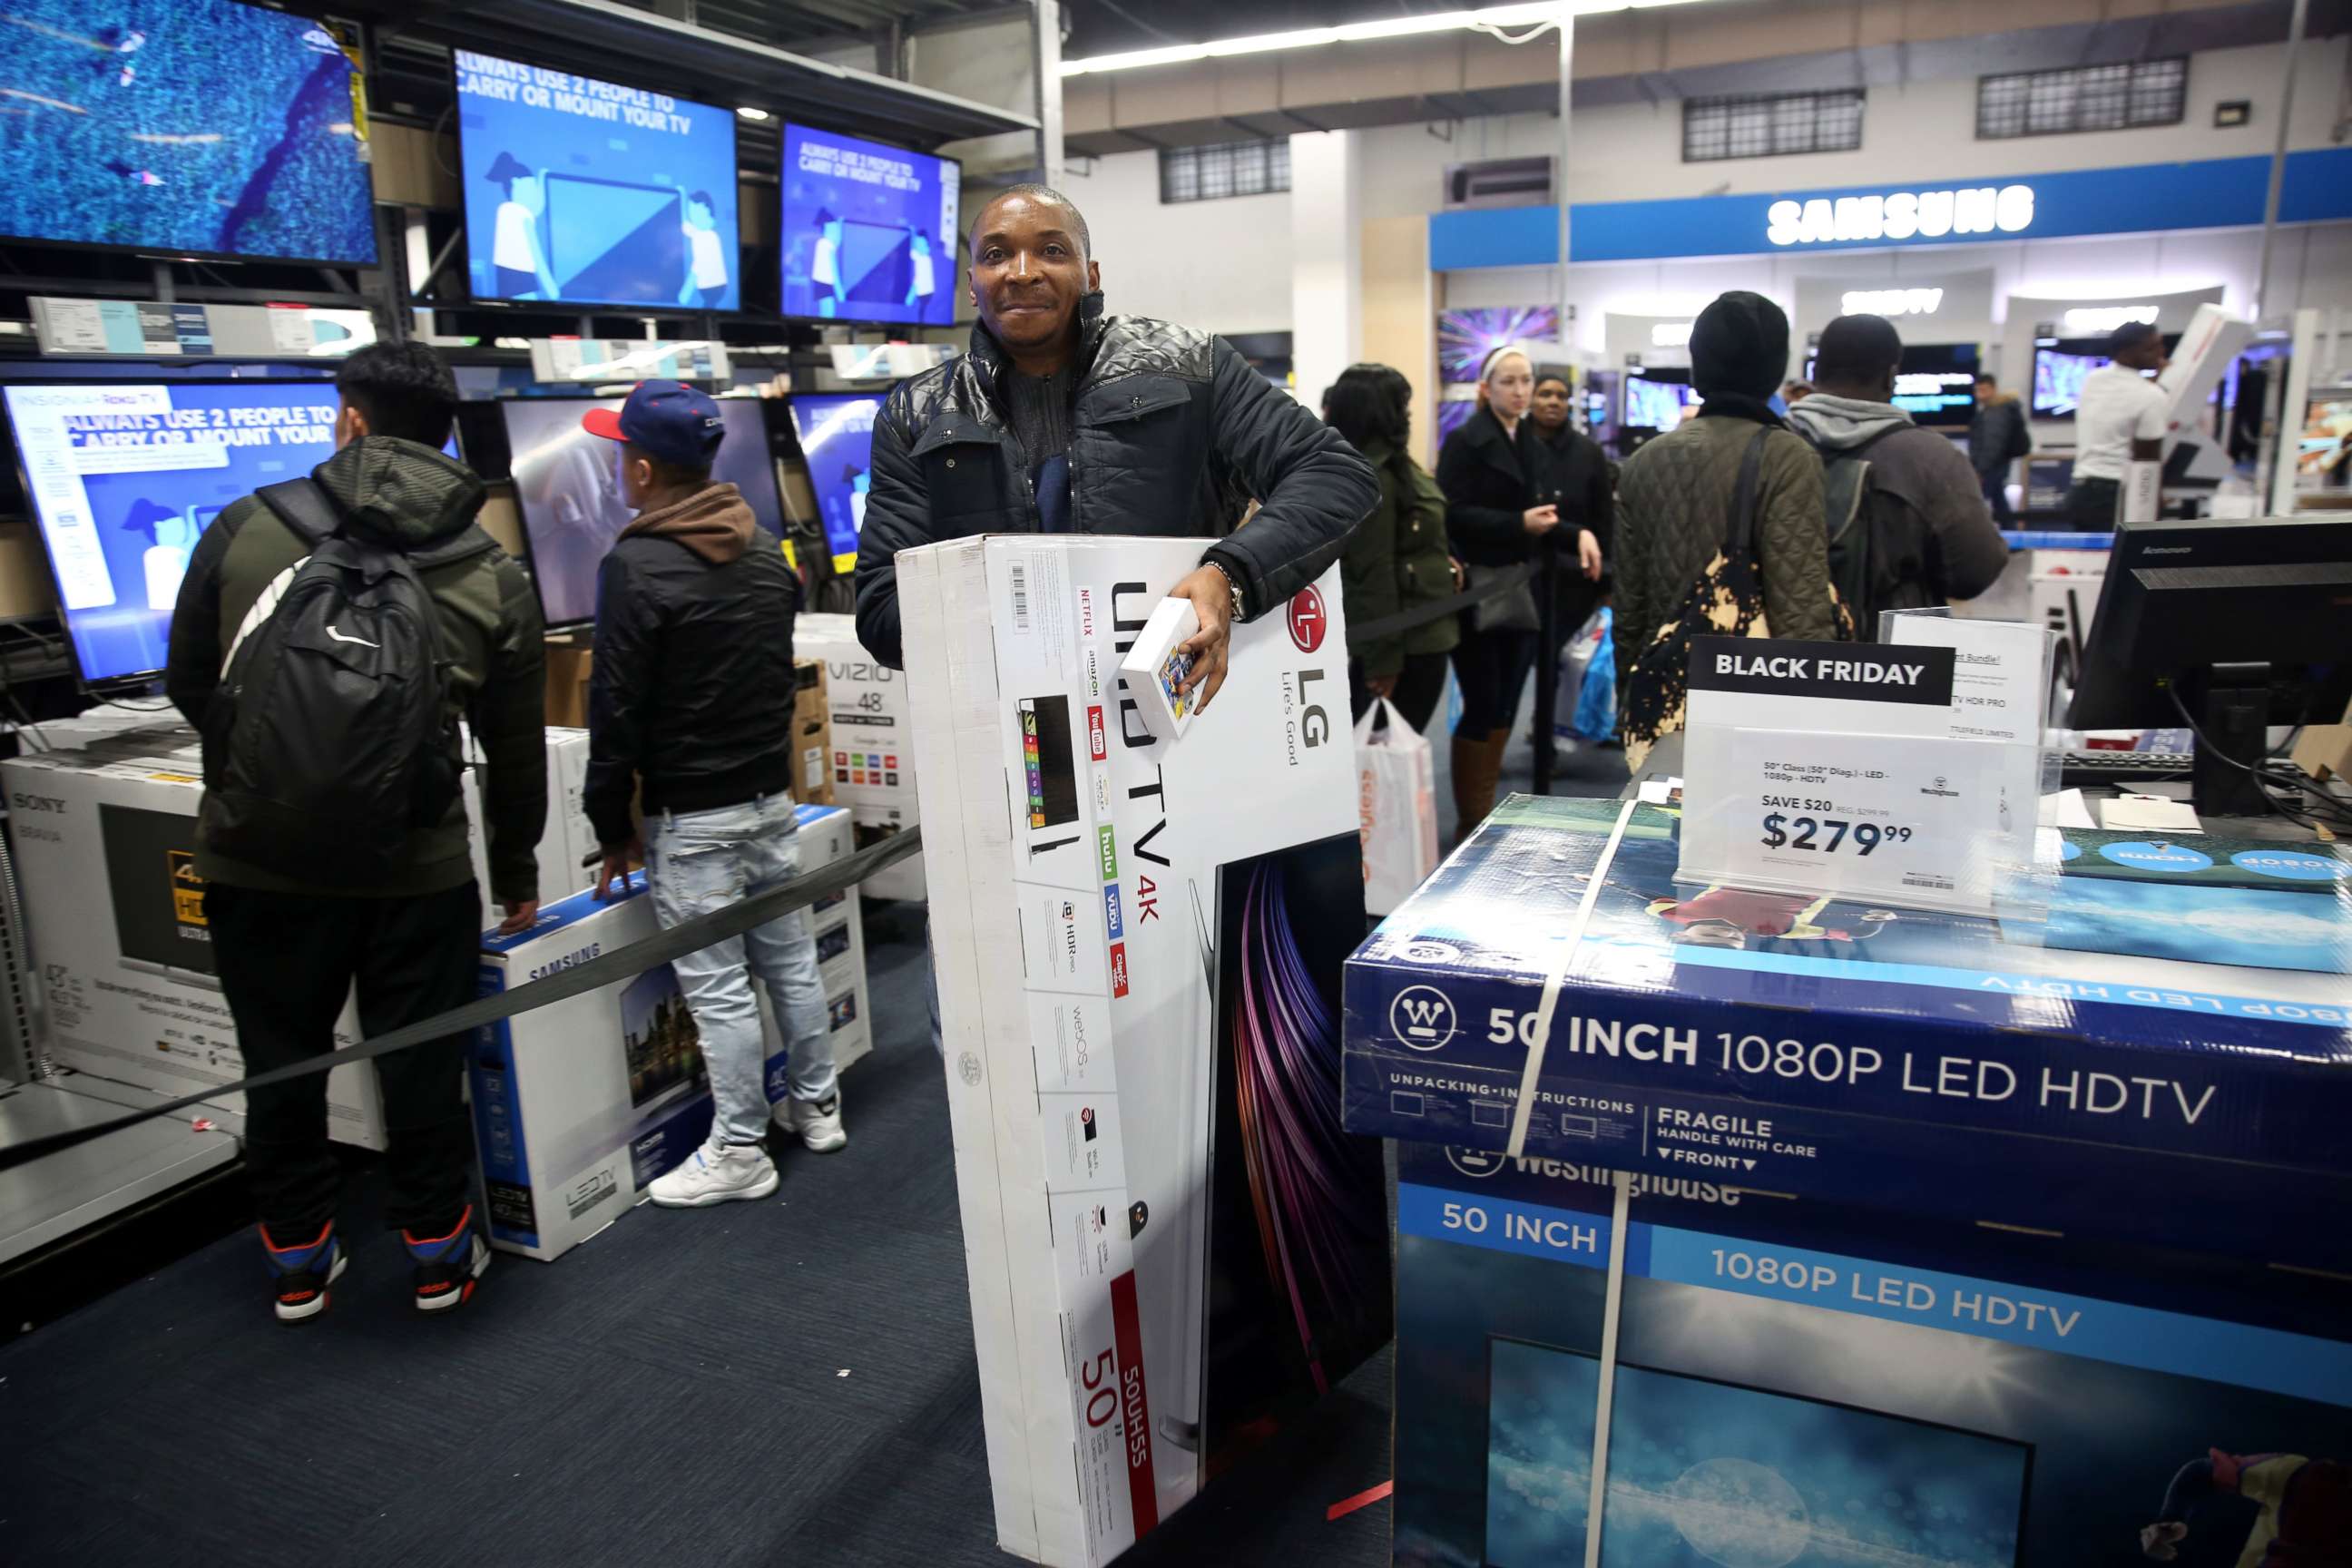 PHOTO: People shop for electronics on Black Friday at a mall in the Brooklyn borough of New York City, Nov. 25, 2016.